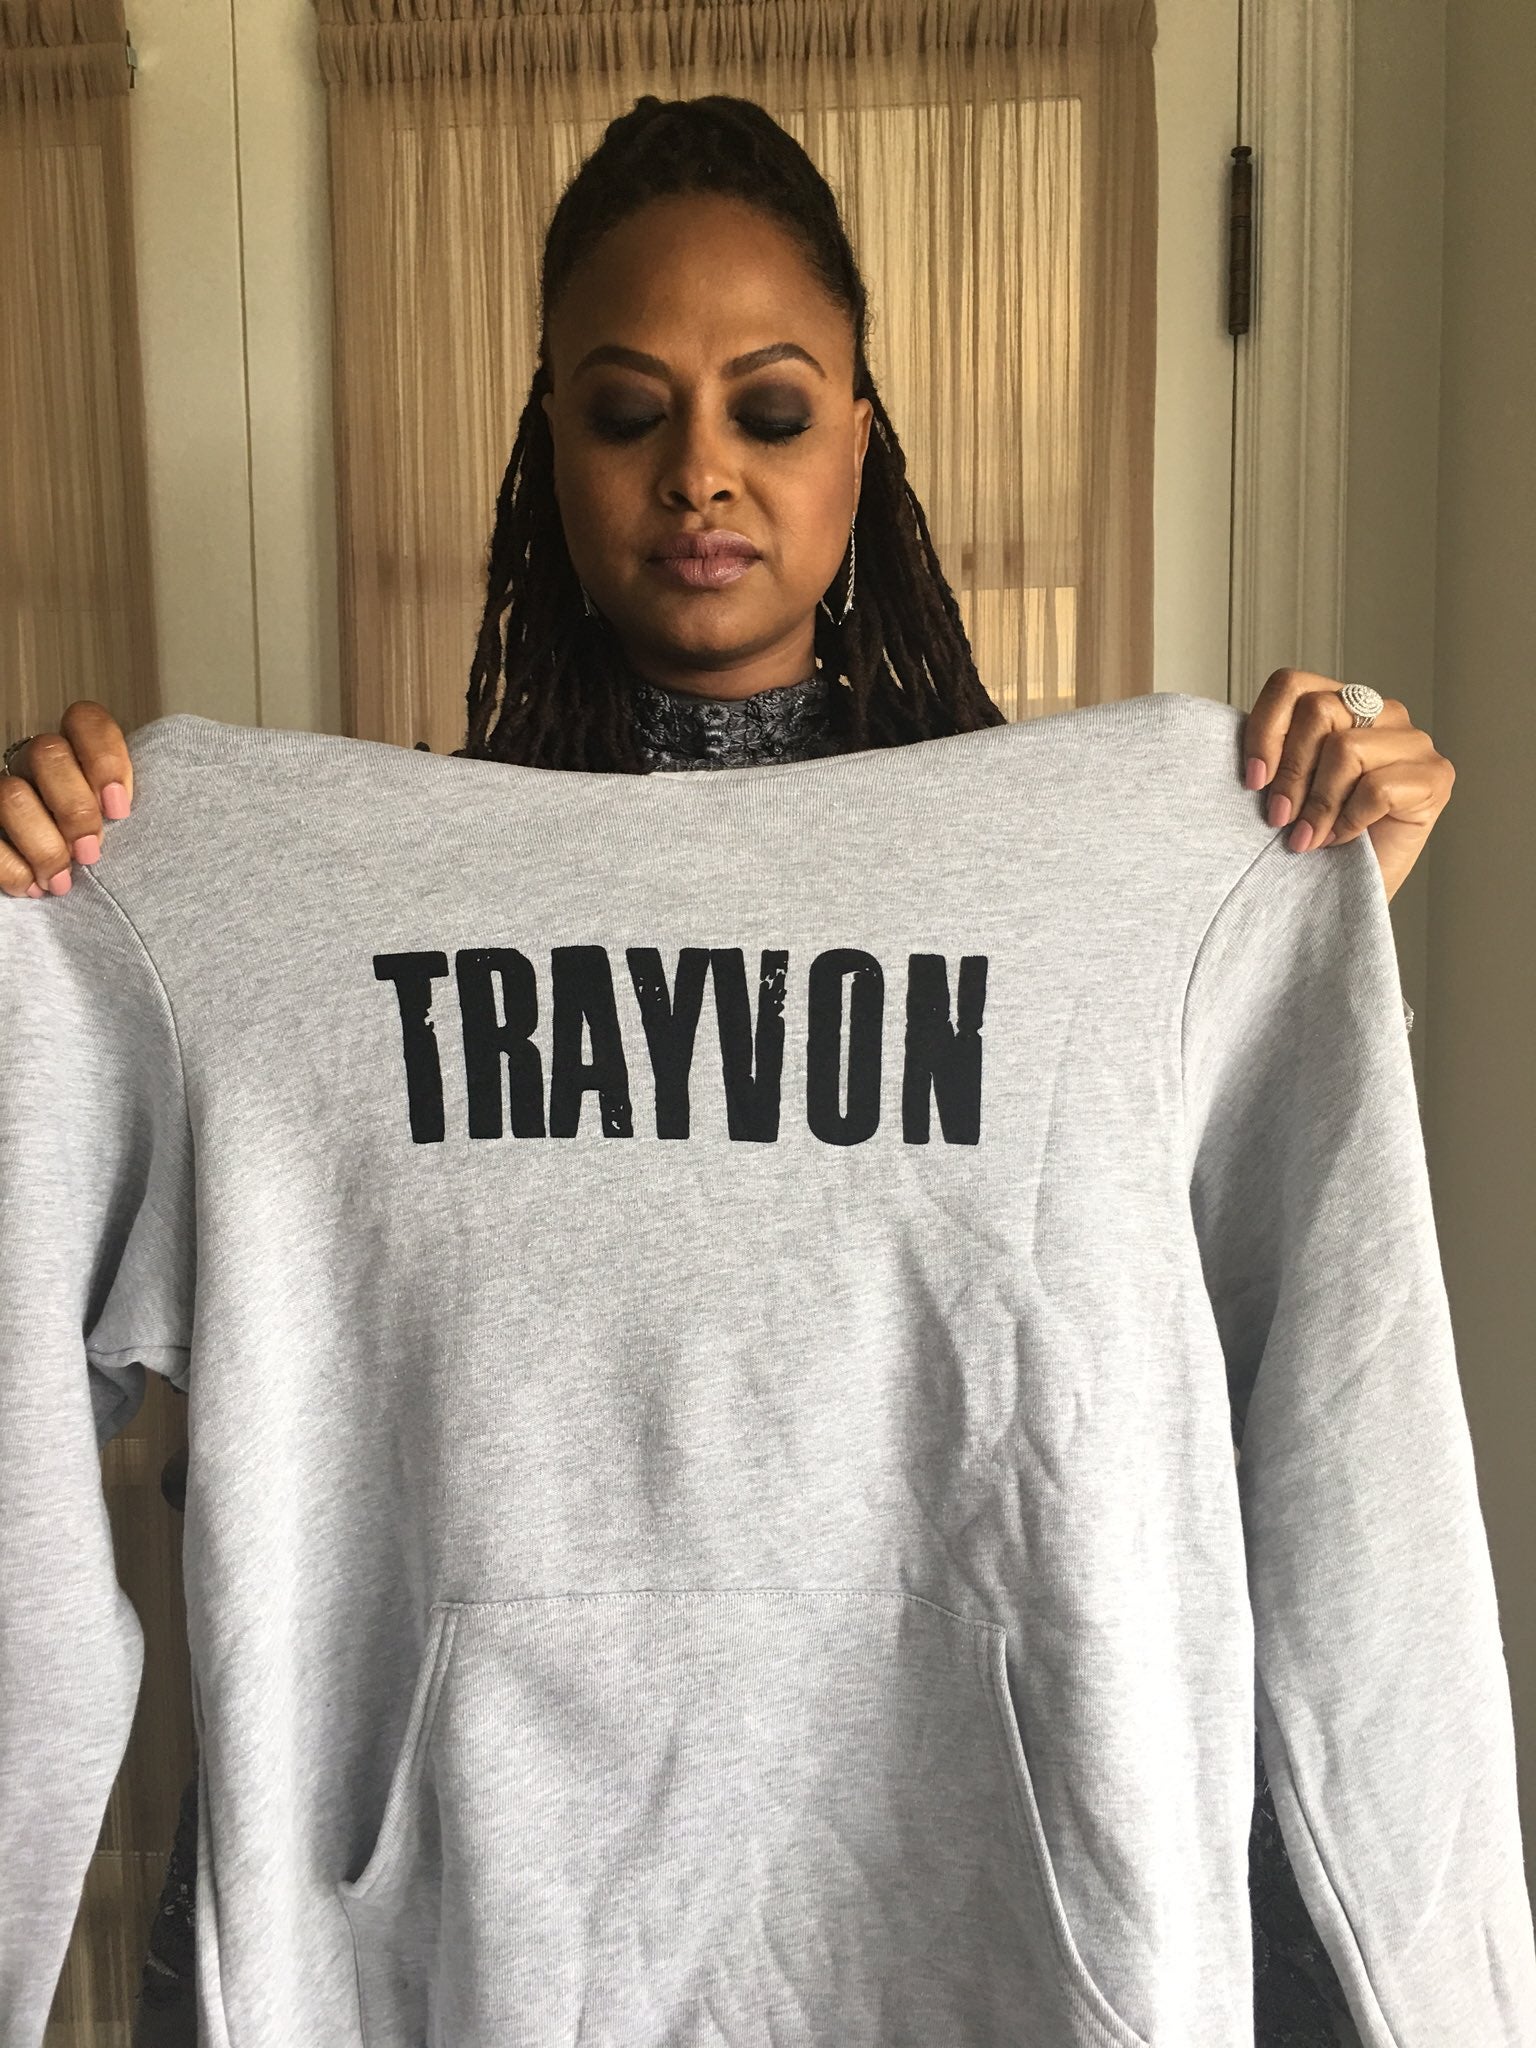 Ava DuVernay, Issa Rae And More Honor Trayvon Martin On The 5th Anniversary Of His Death